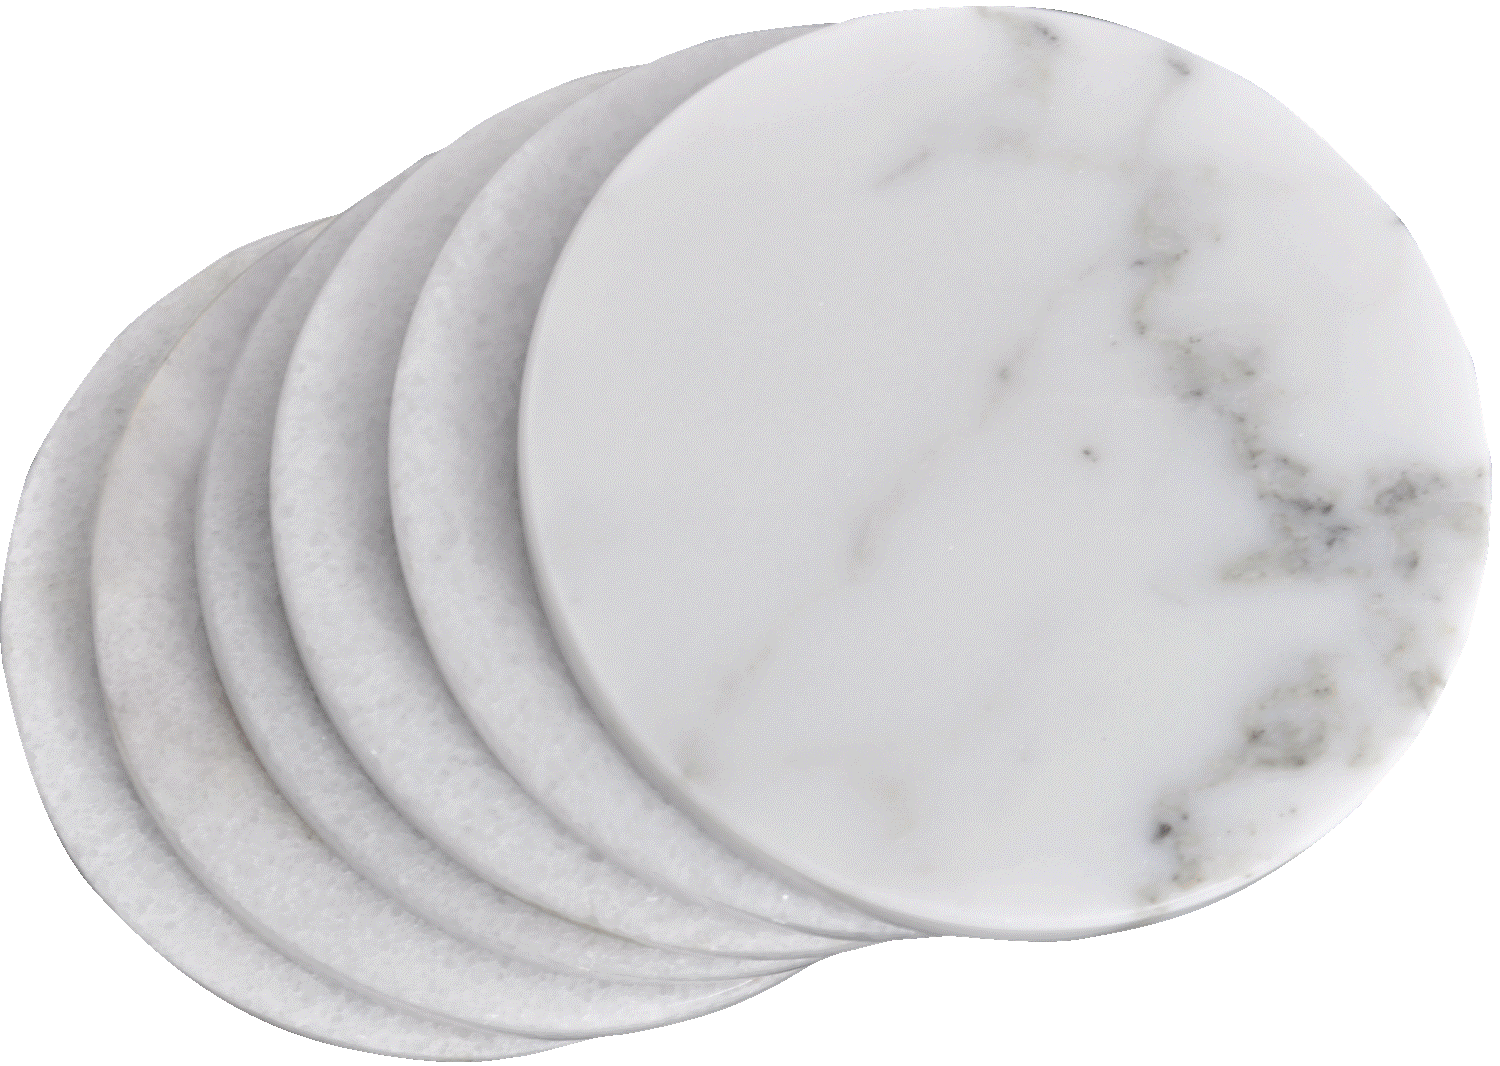 CraftsOfEgypt Set of 6 - White Marble Stone Coasters Polished Coasters –  3.5 Inches (9 cm) in Diameter – Protection from Drink Rings